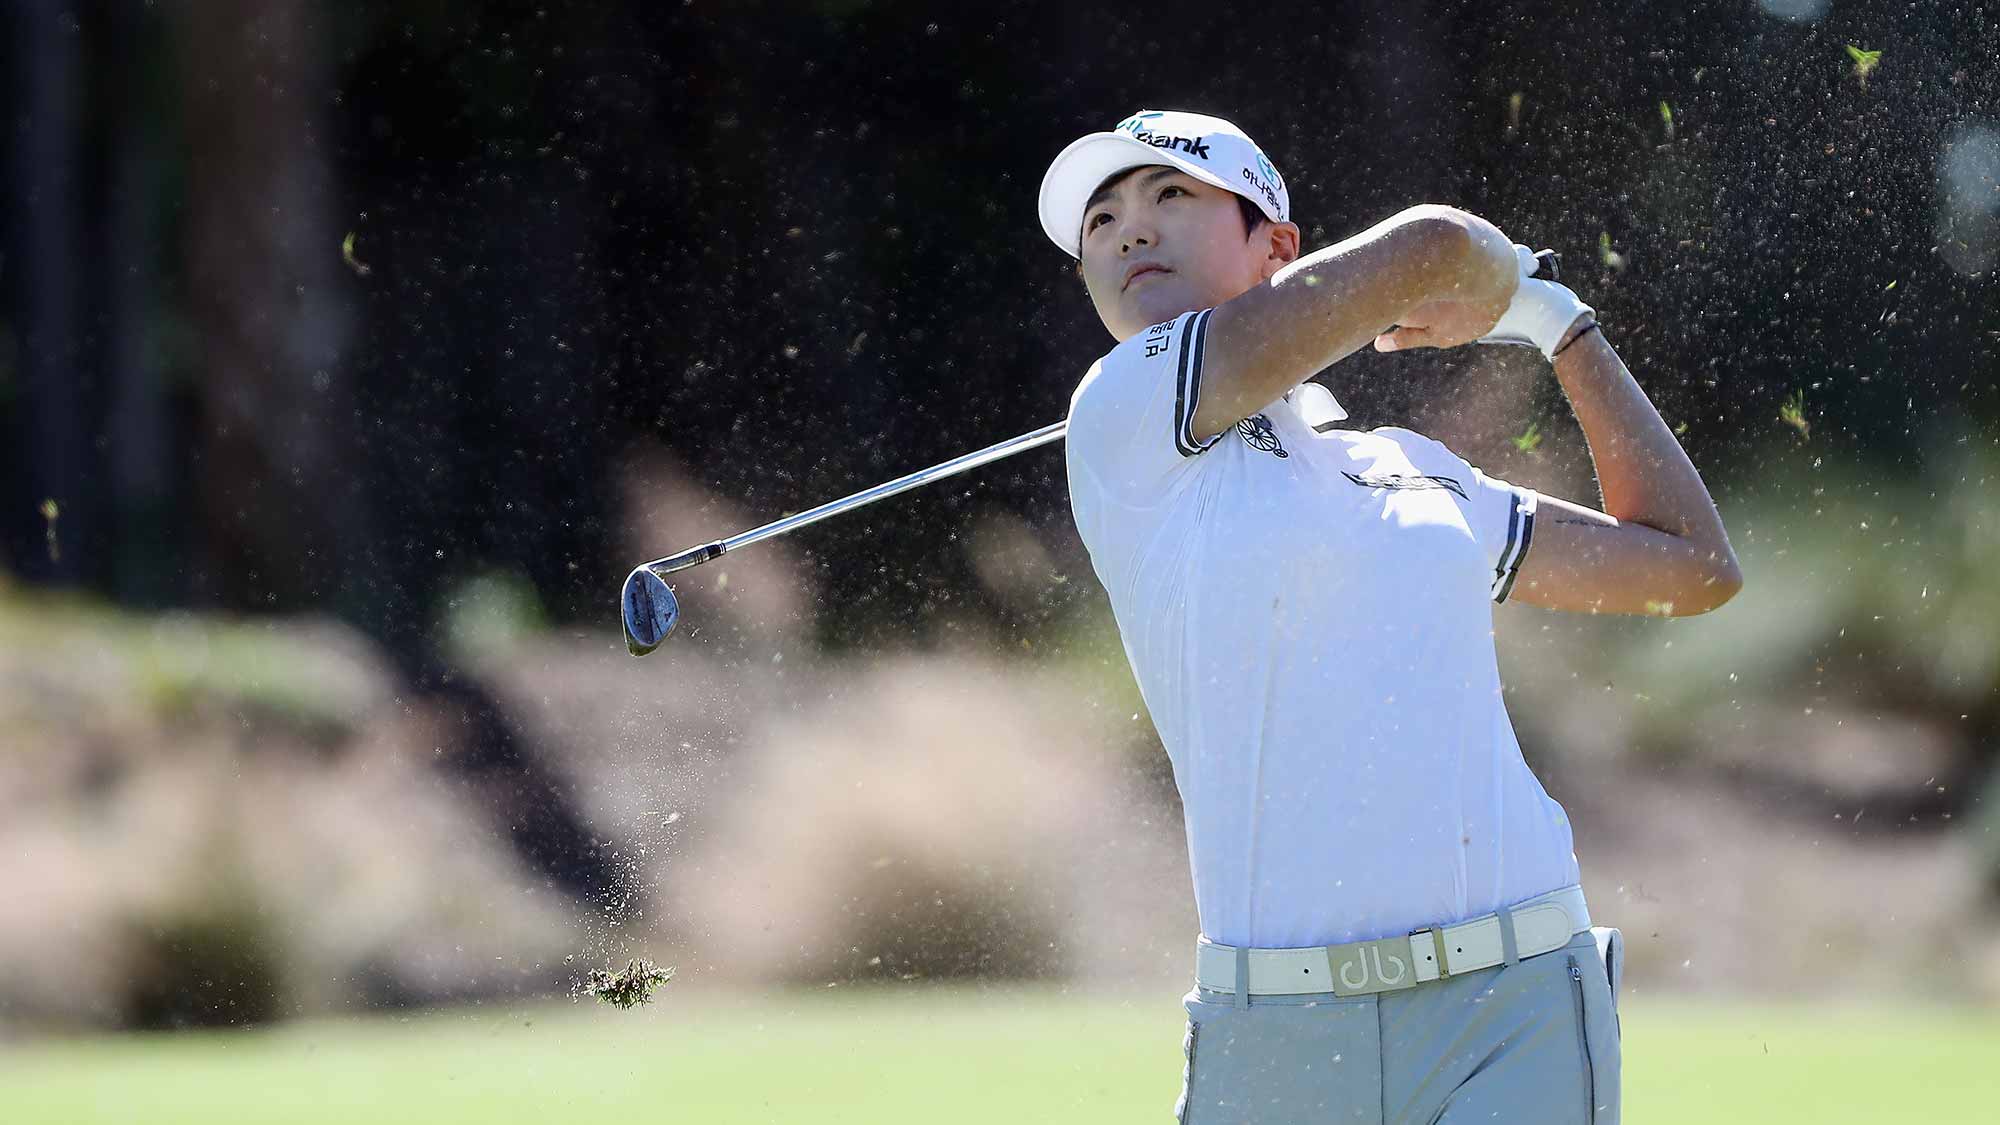 Sung Hyun Park of Korea plays a shot on the second hole during the final round of the CME Group Tour Championship